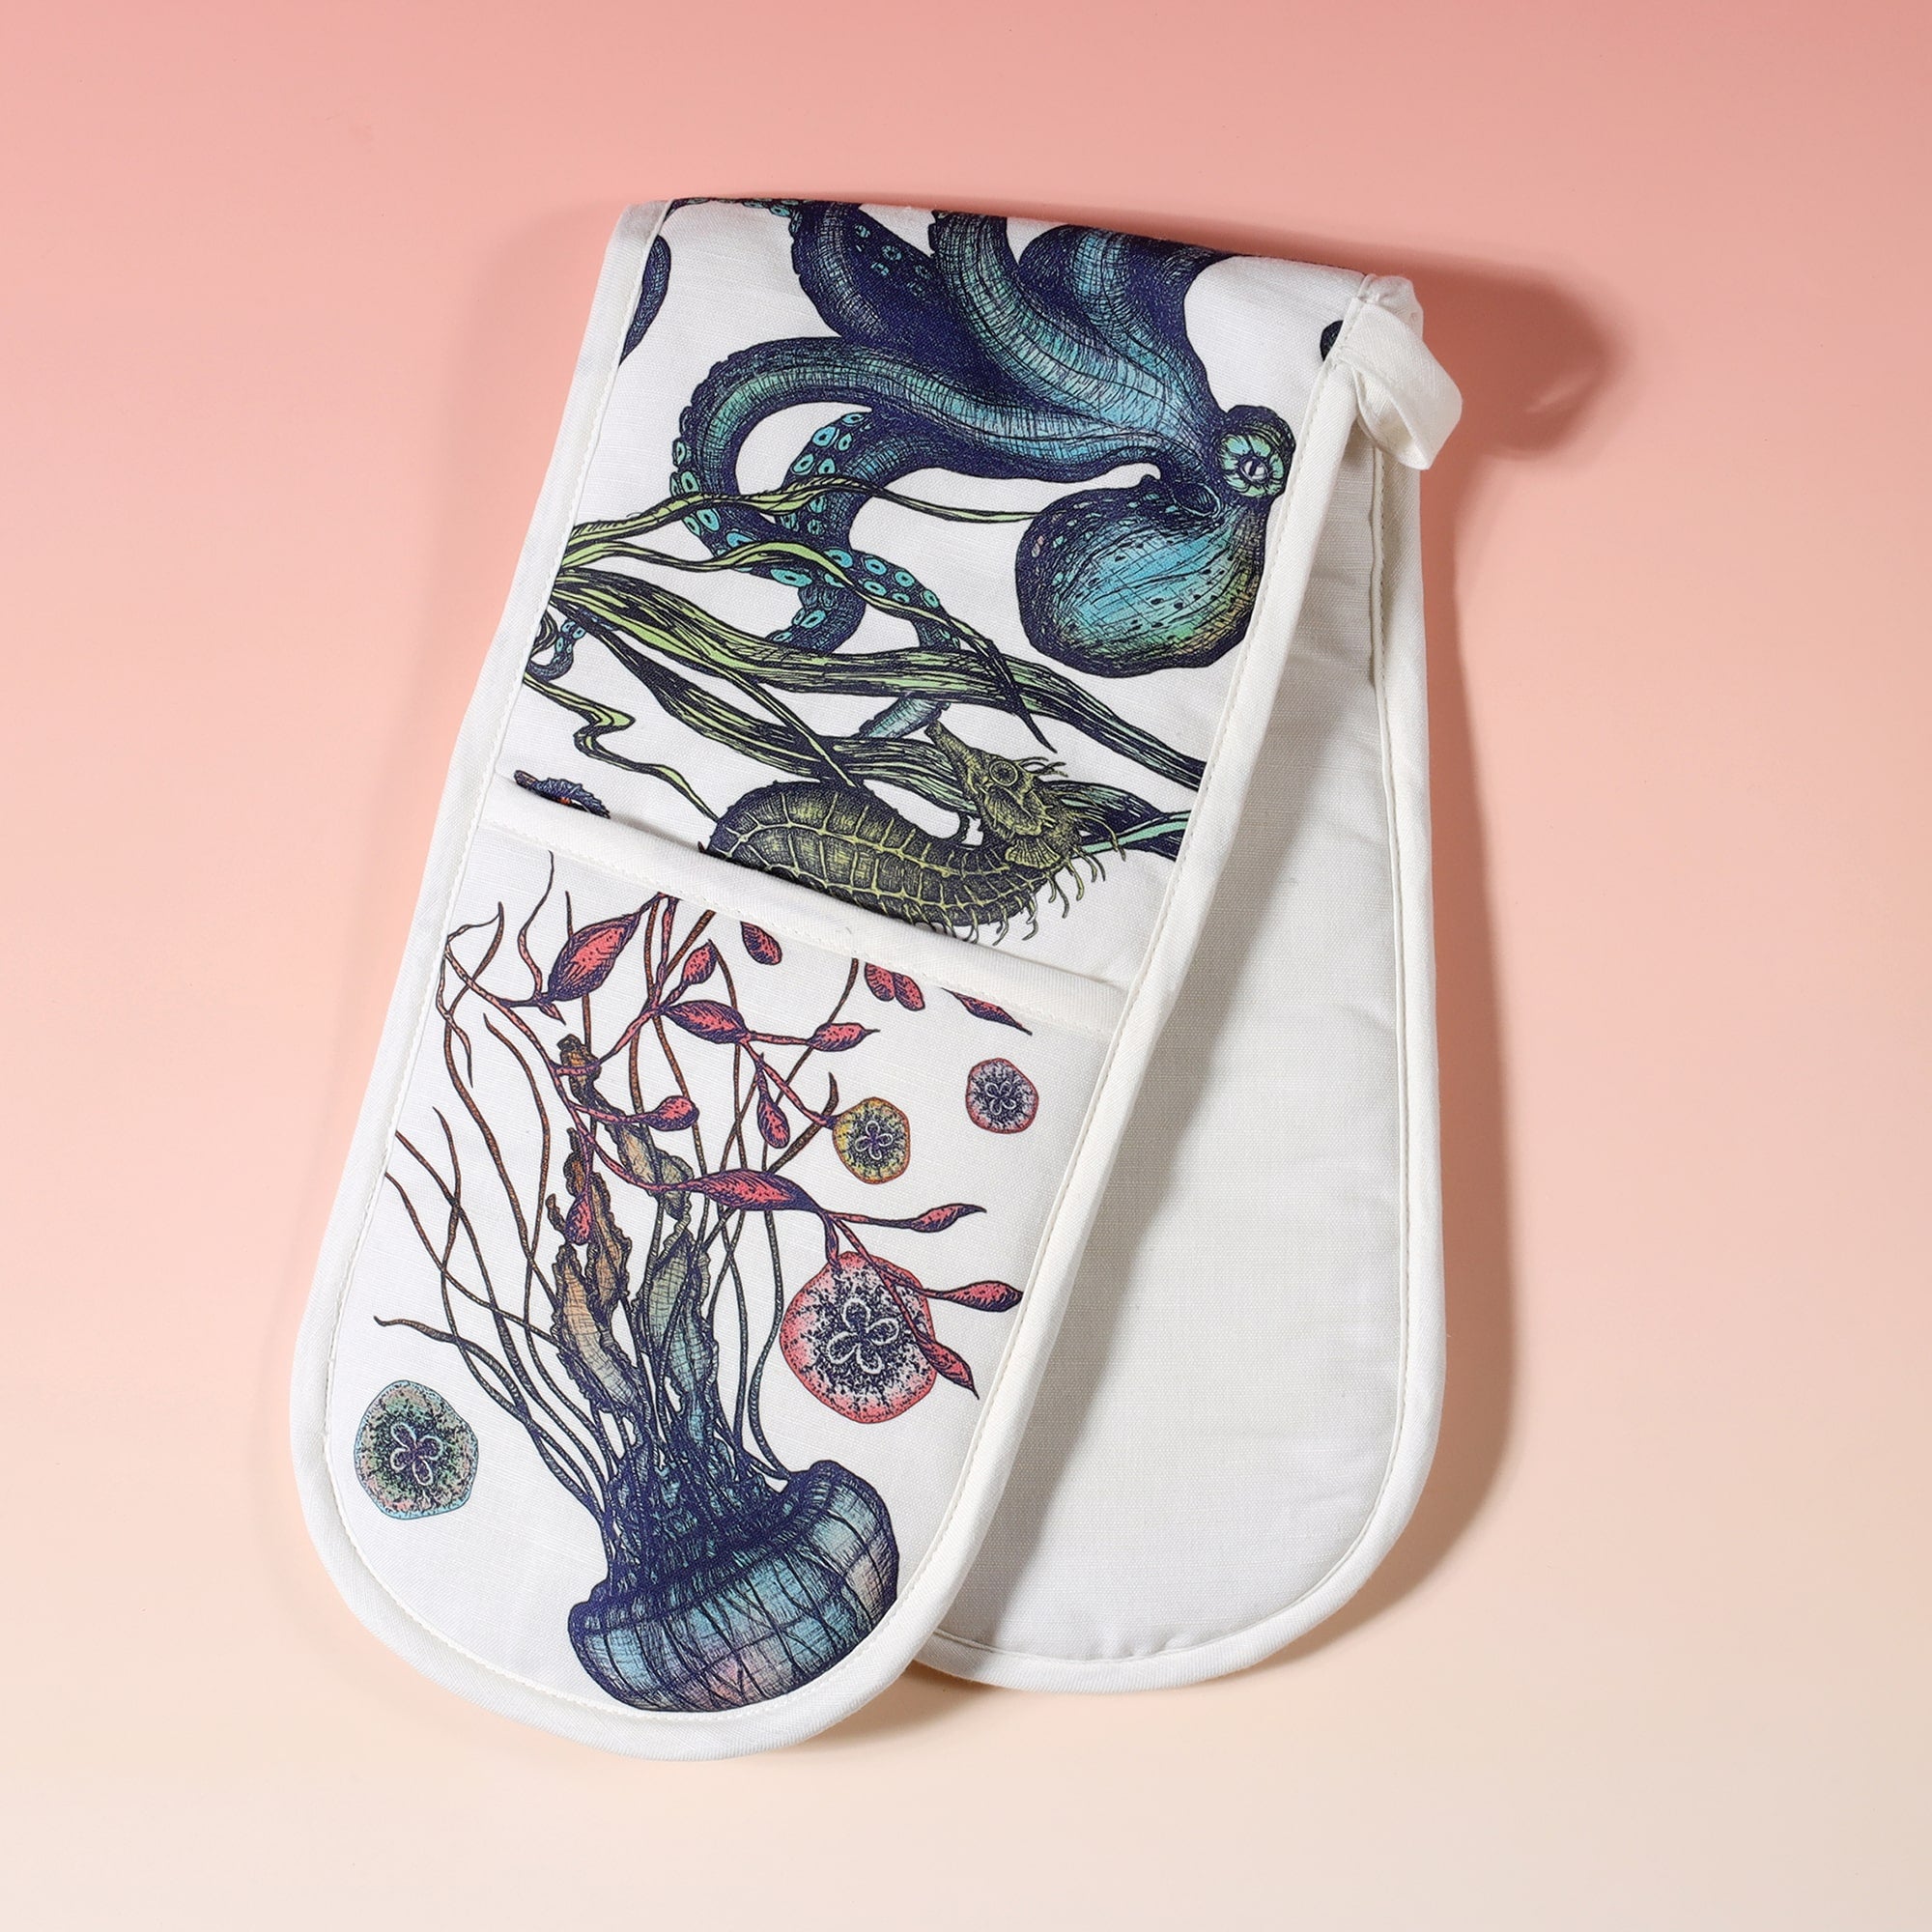 Cotton and linen mix oven gloves with hand drawn illustrations of coloured reef print of Jellyfish,seahorses,starfish and Octopus  